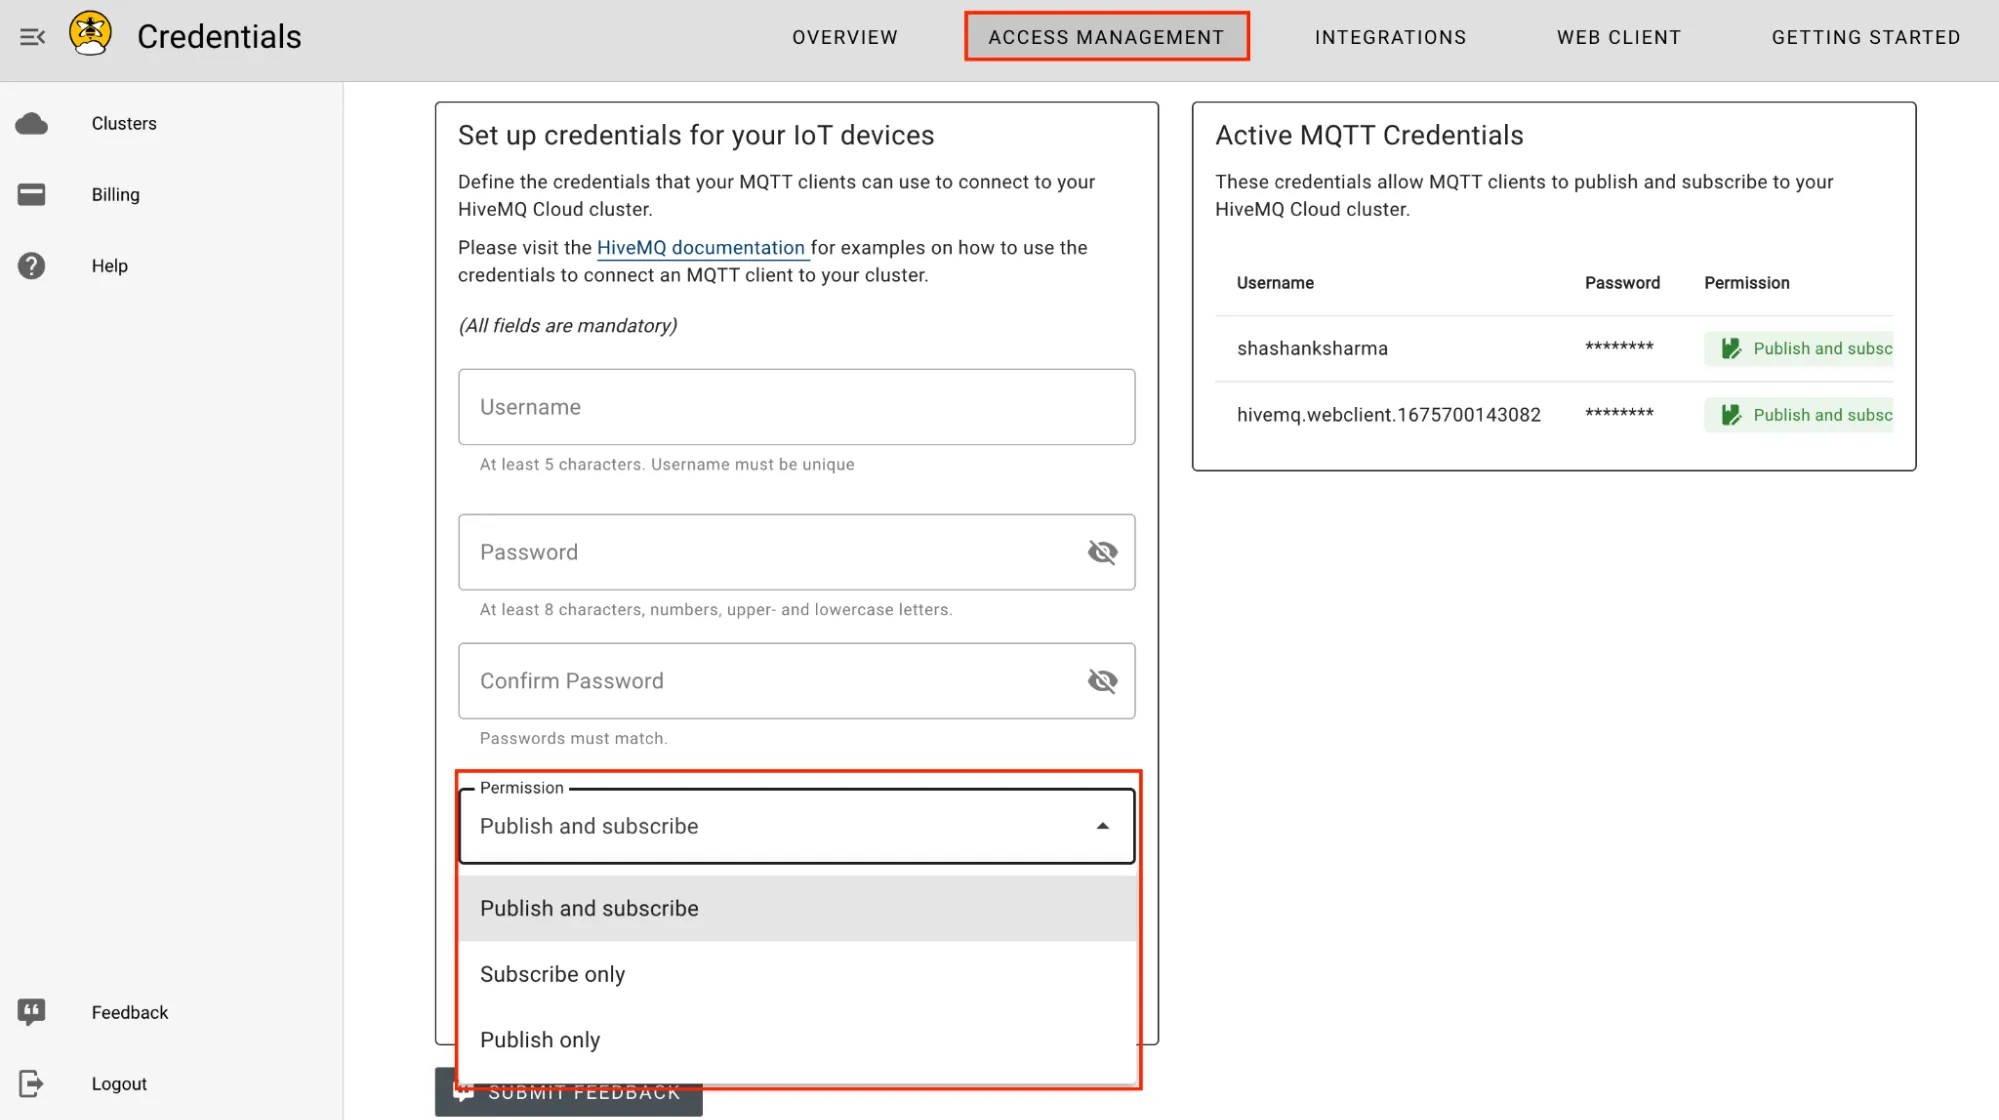 MQTT credentials can be set up under the access management tab